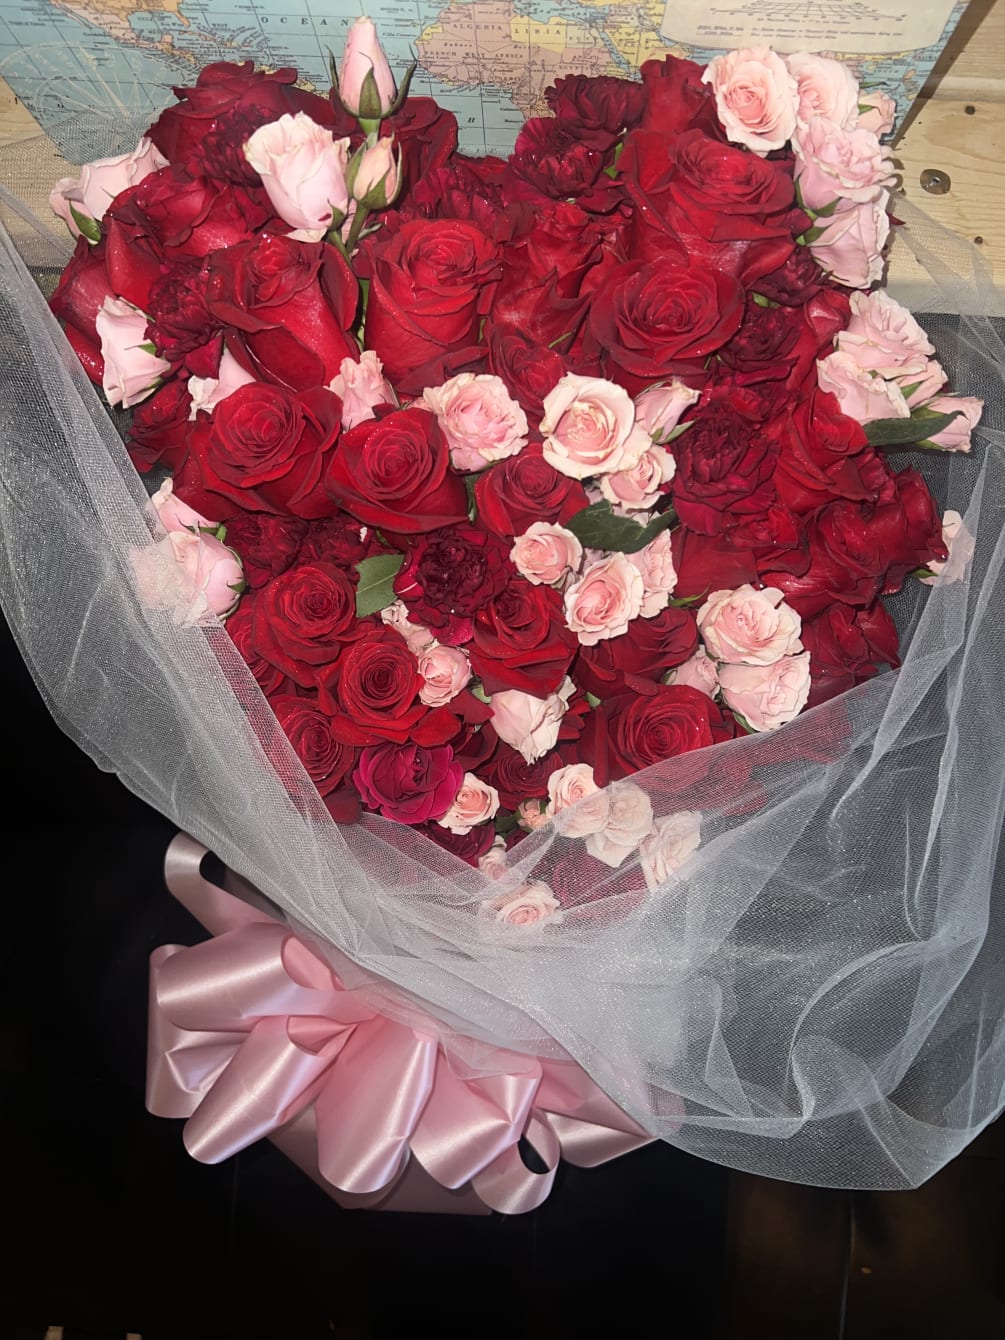 A rose bouquets with more than 50 roses that will draw the